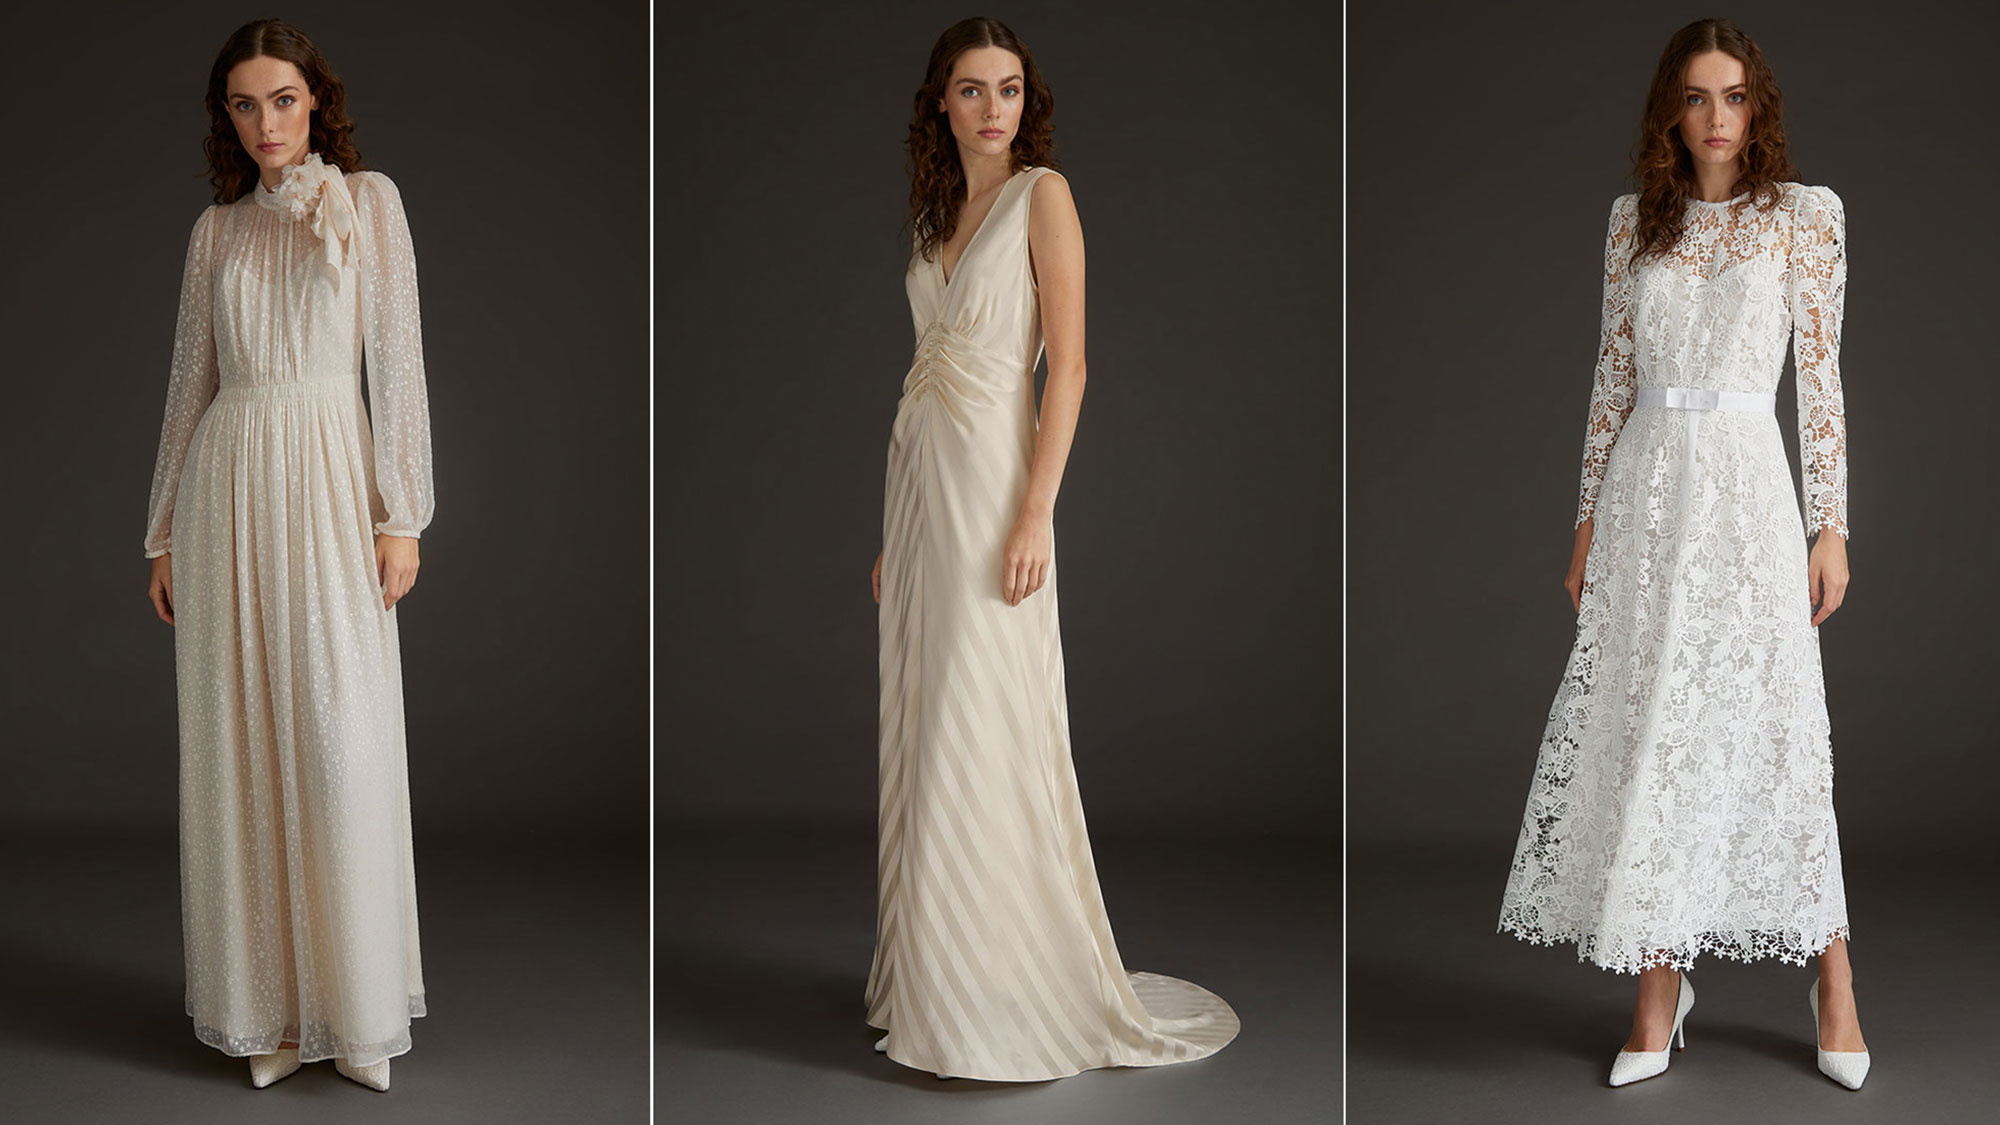 Kate Middleton’s favourite high street brand has just launched wedding dresses